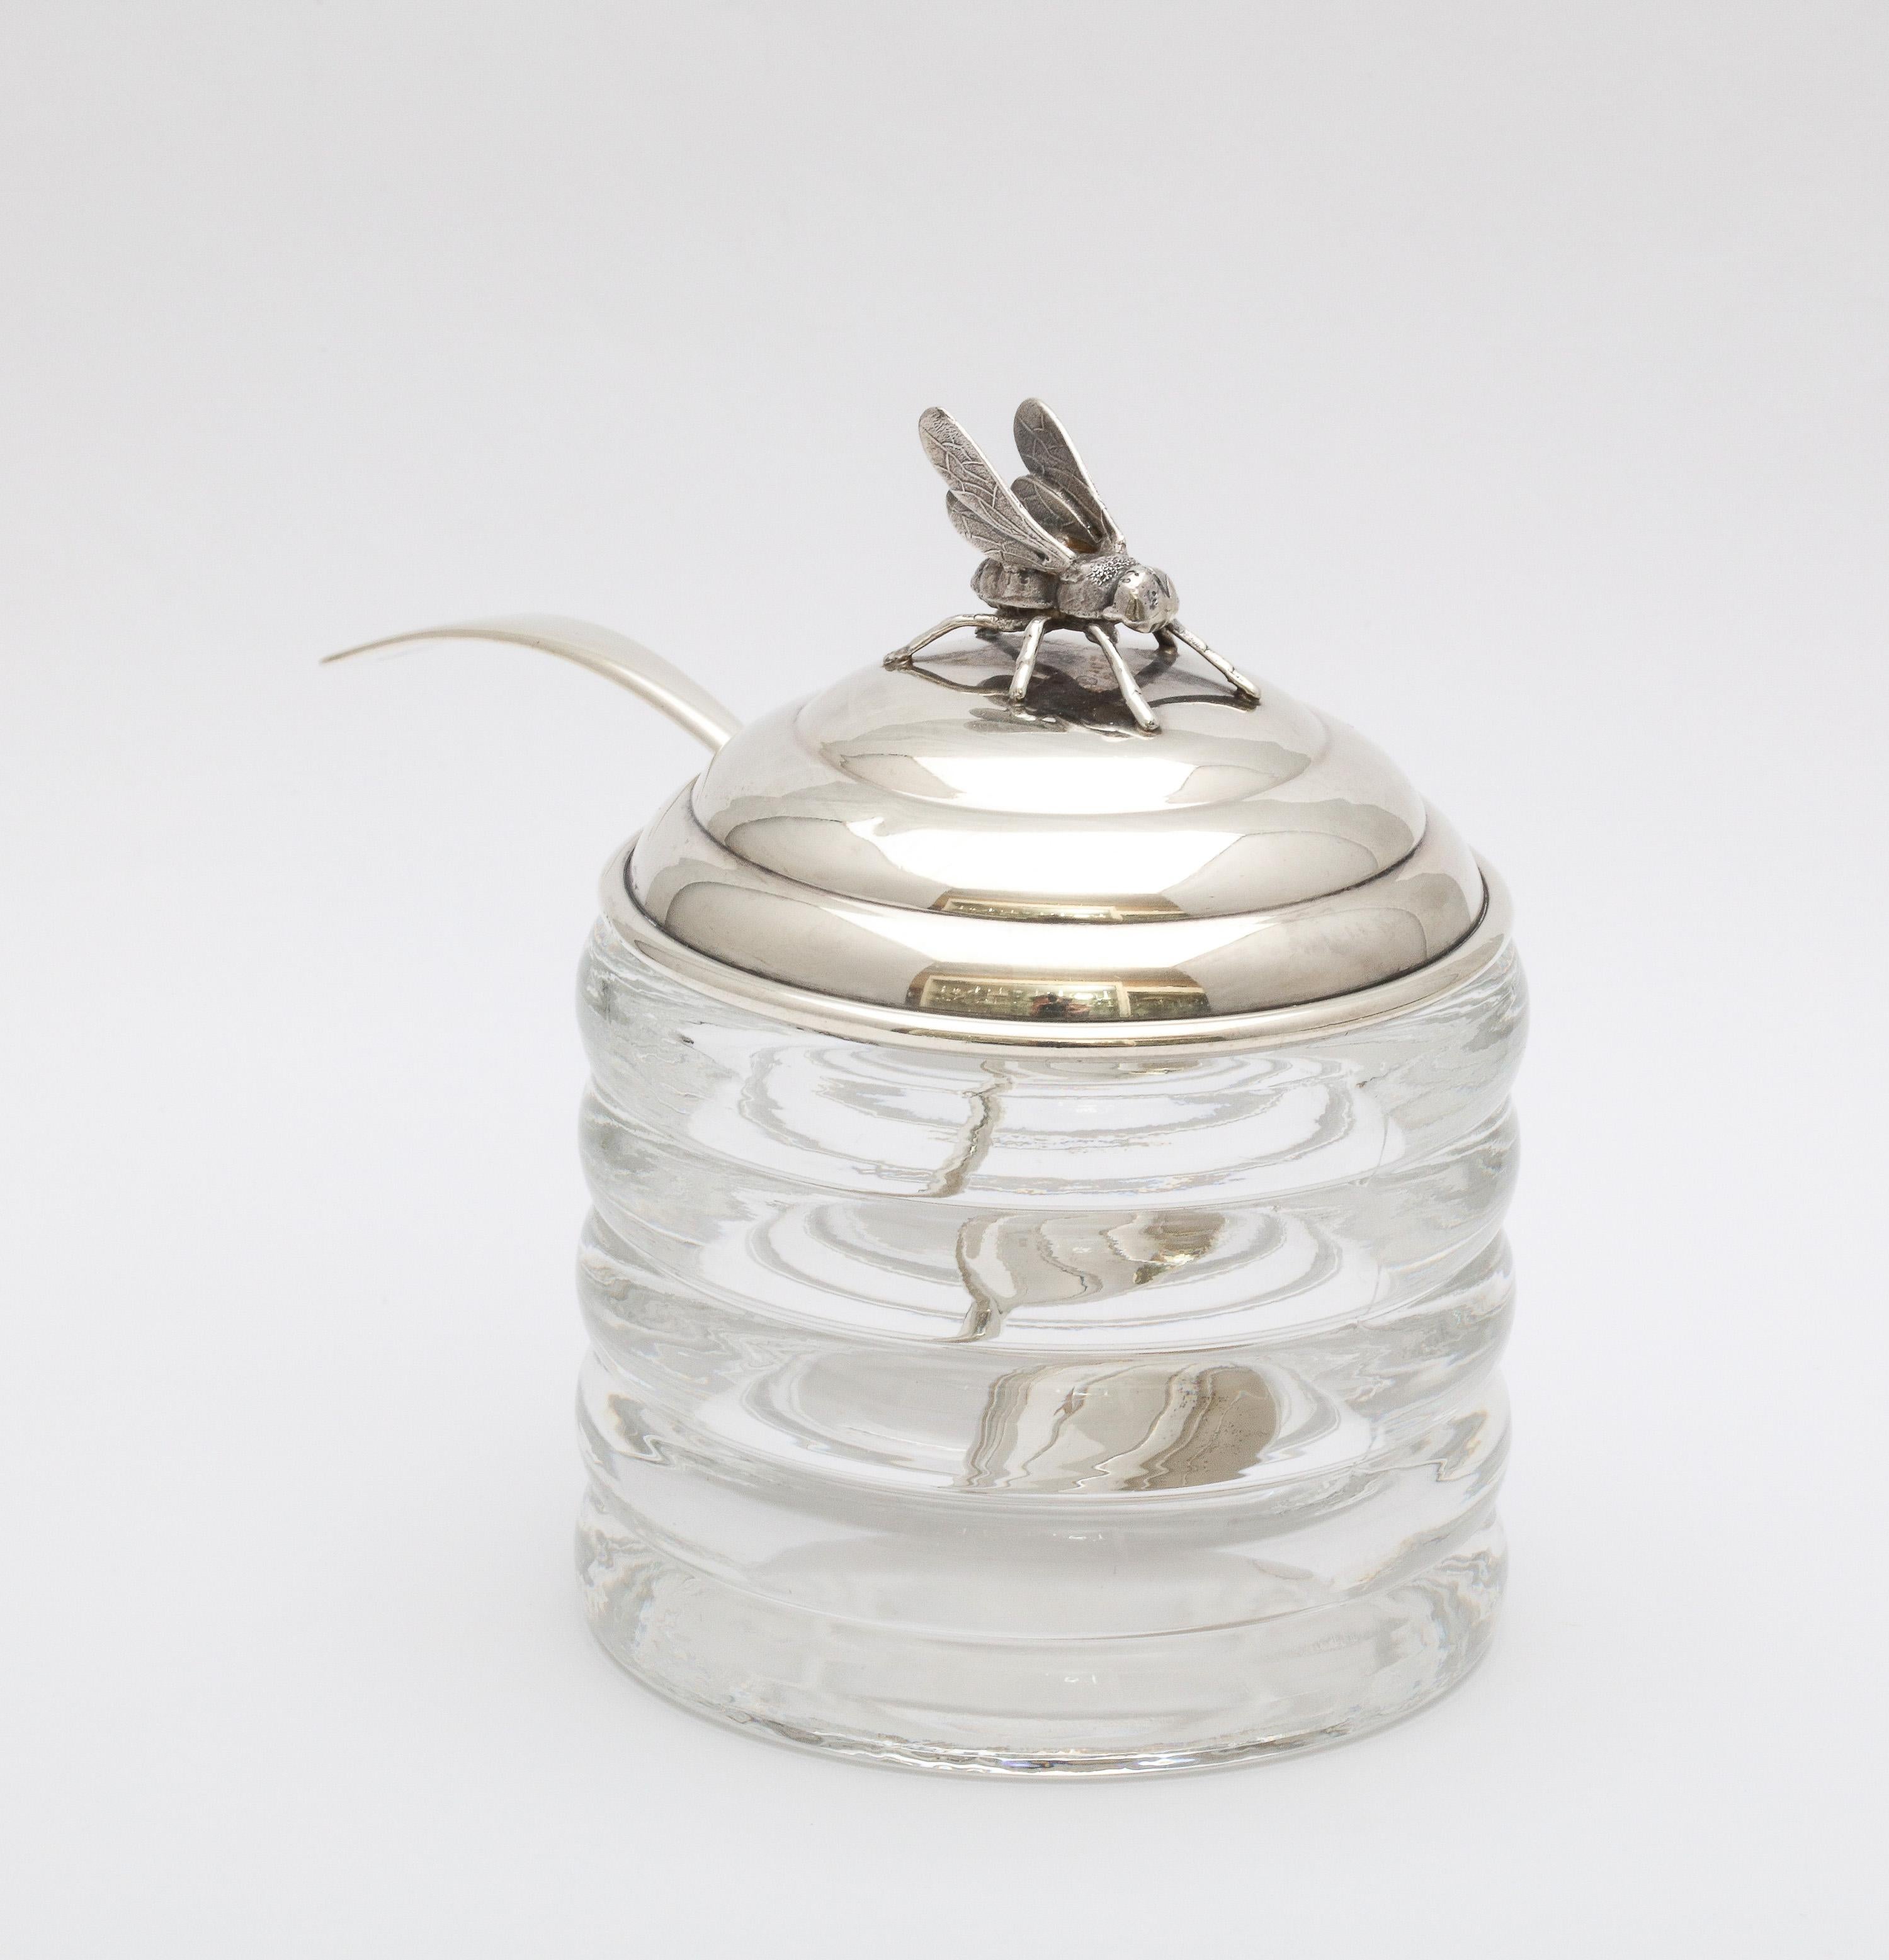 Art Deco Period, sterling silver-mounted honey jar with original honey spoon, R. Blackinton and Co., North Attleboro, Mass., Ca. 1930's. Glass is beehive-form; sterling silver lid is topped by a honey bee finial. Underside of sterling silver lid is